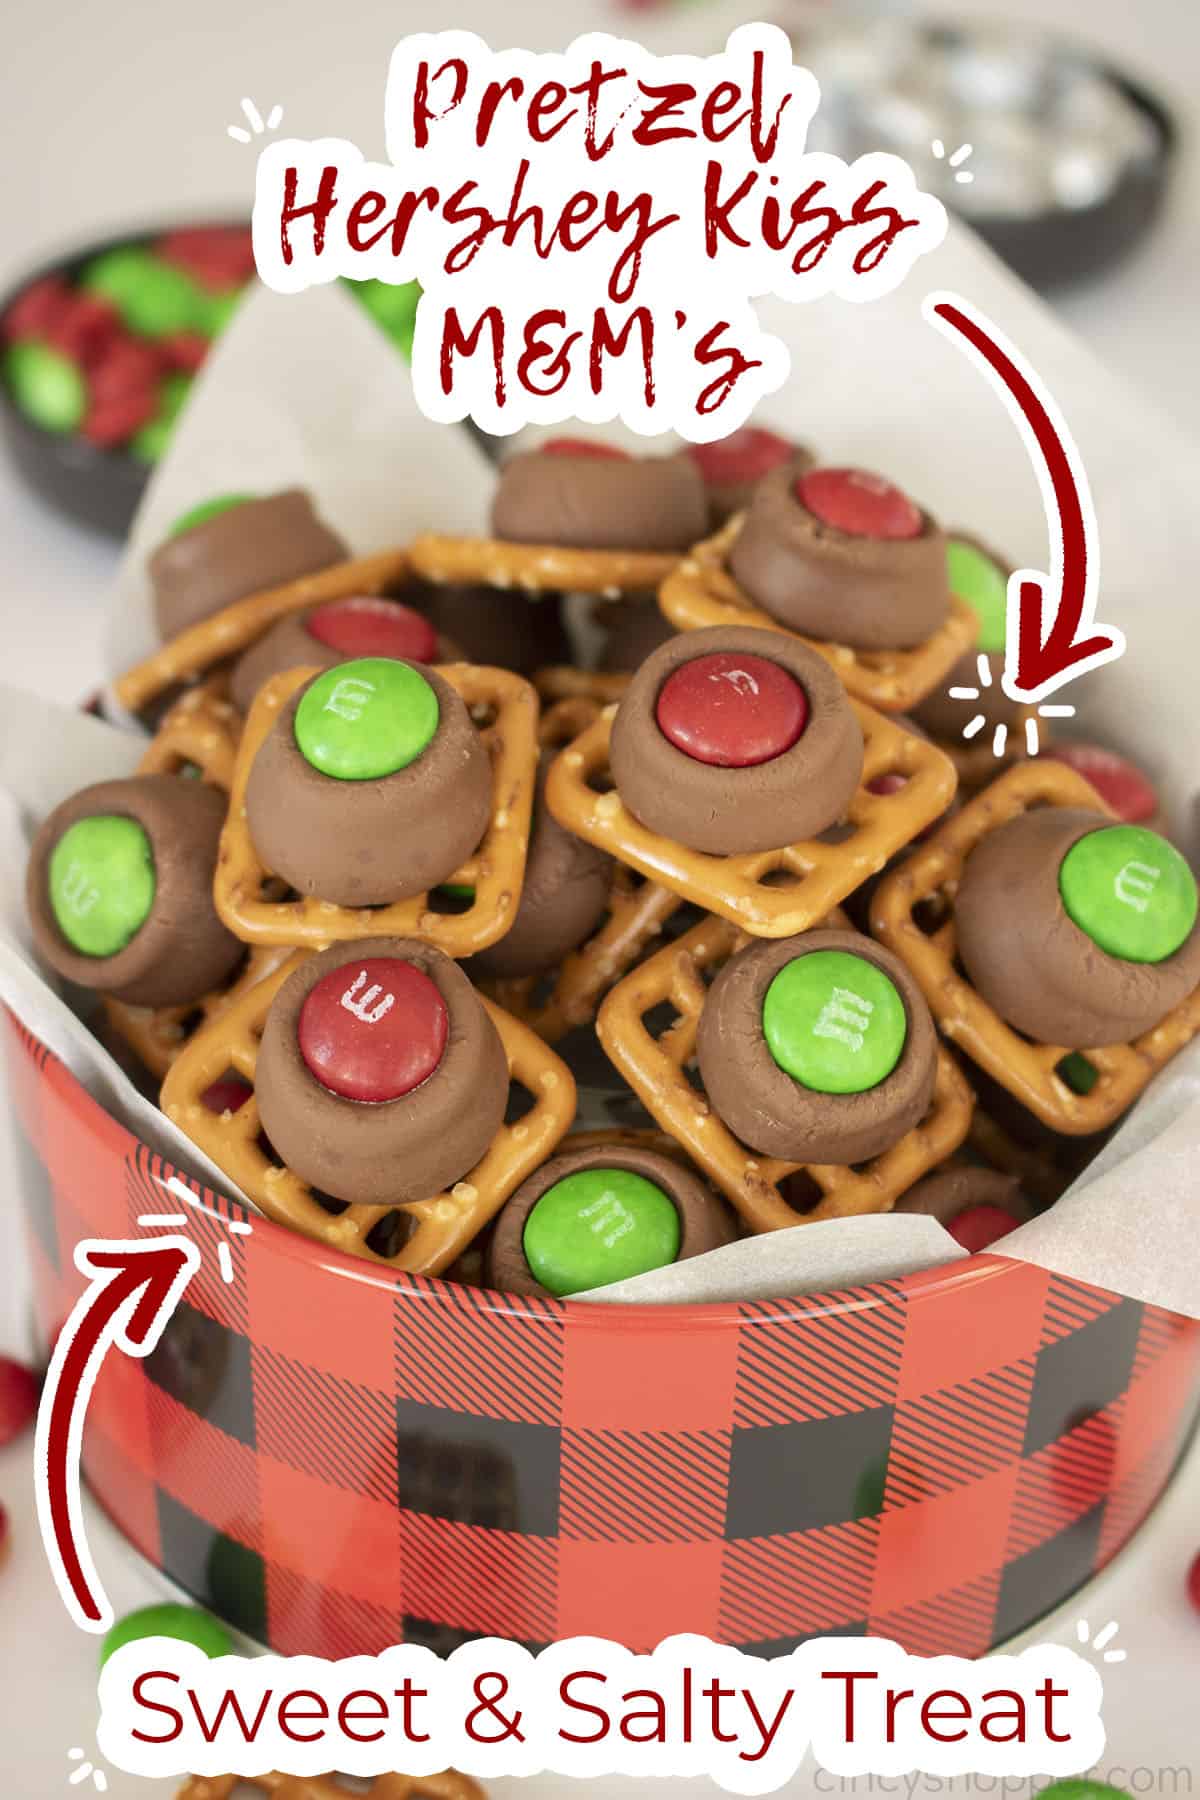 Text on image Pretzel Hershey Kiss M&M's Sweet and Salty Treat.